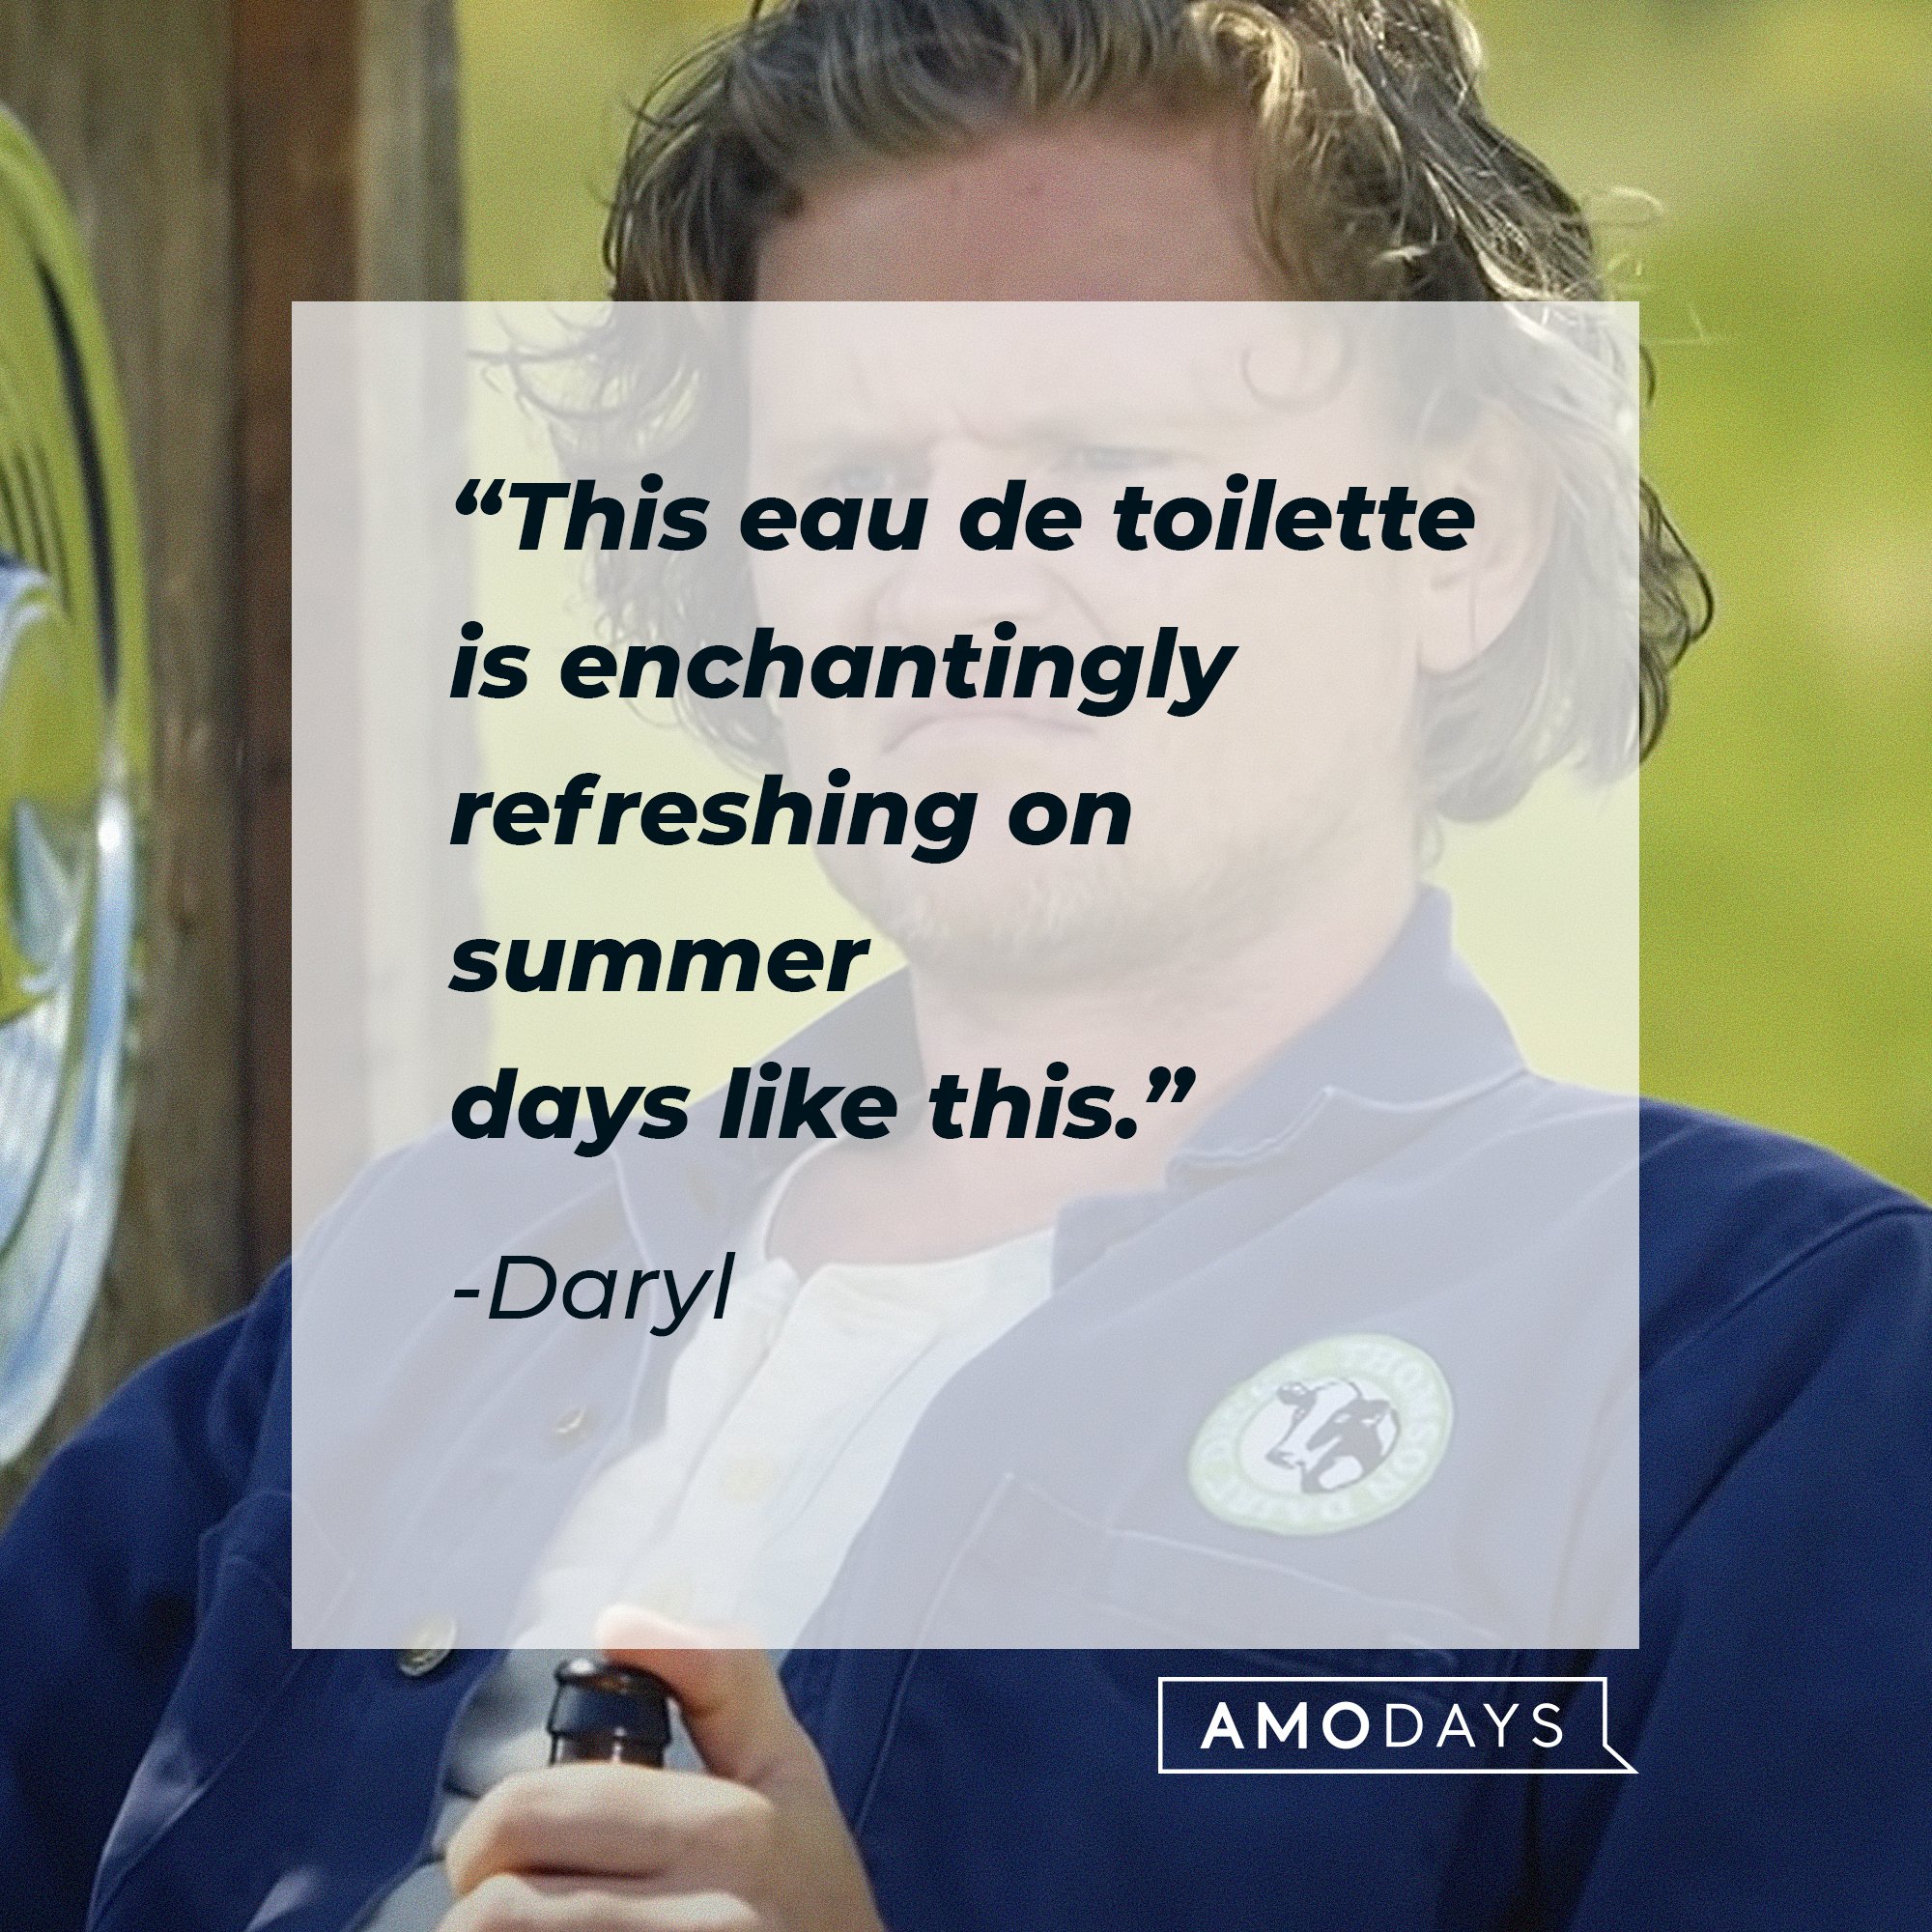 Daryl’s quote: “This eau de toilette is enchantingly refreshing on summer days like this.” | Image: AmoDays